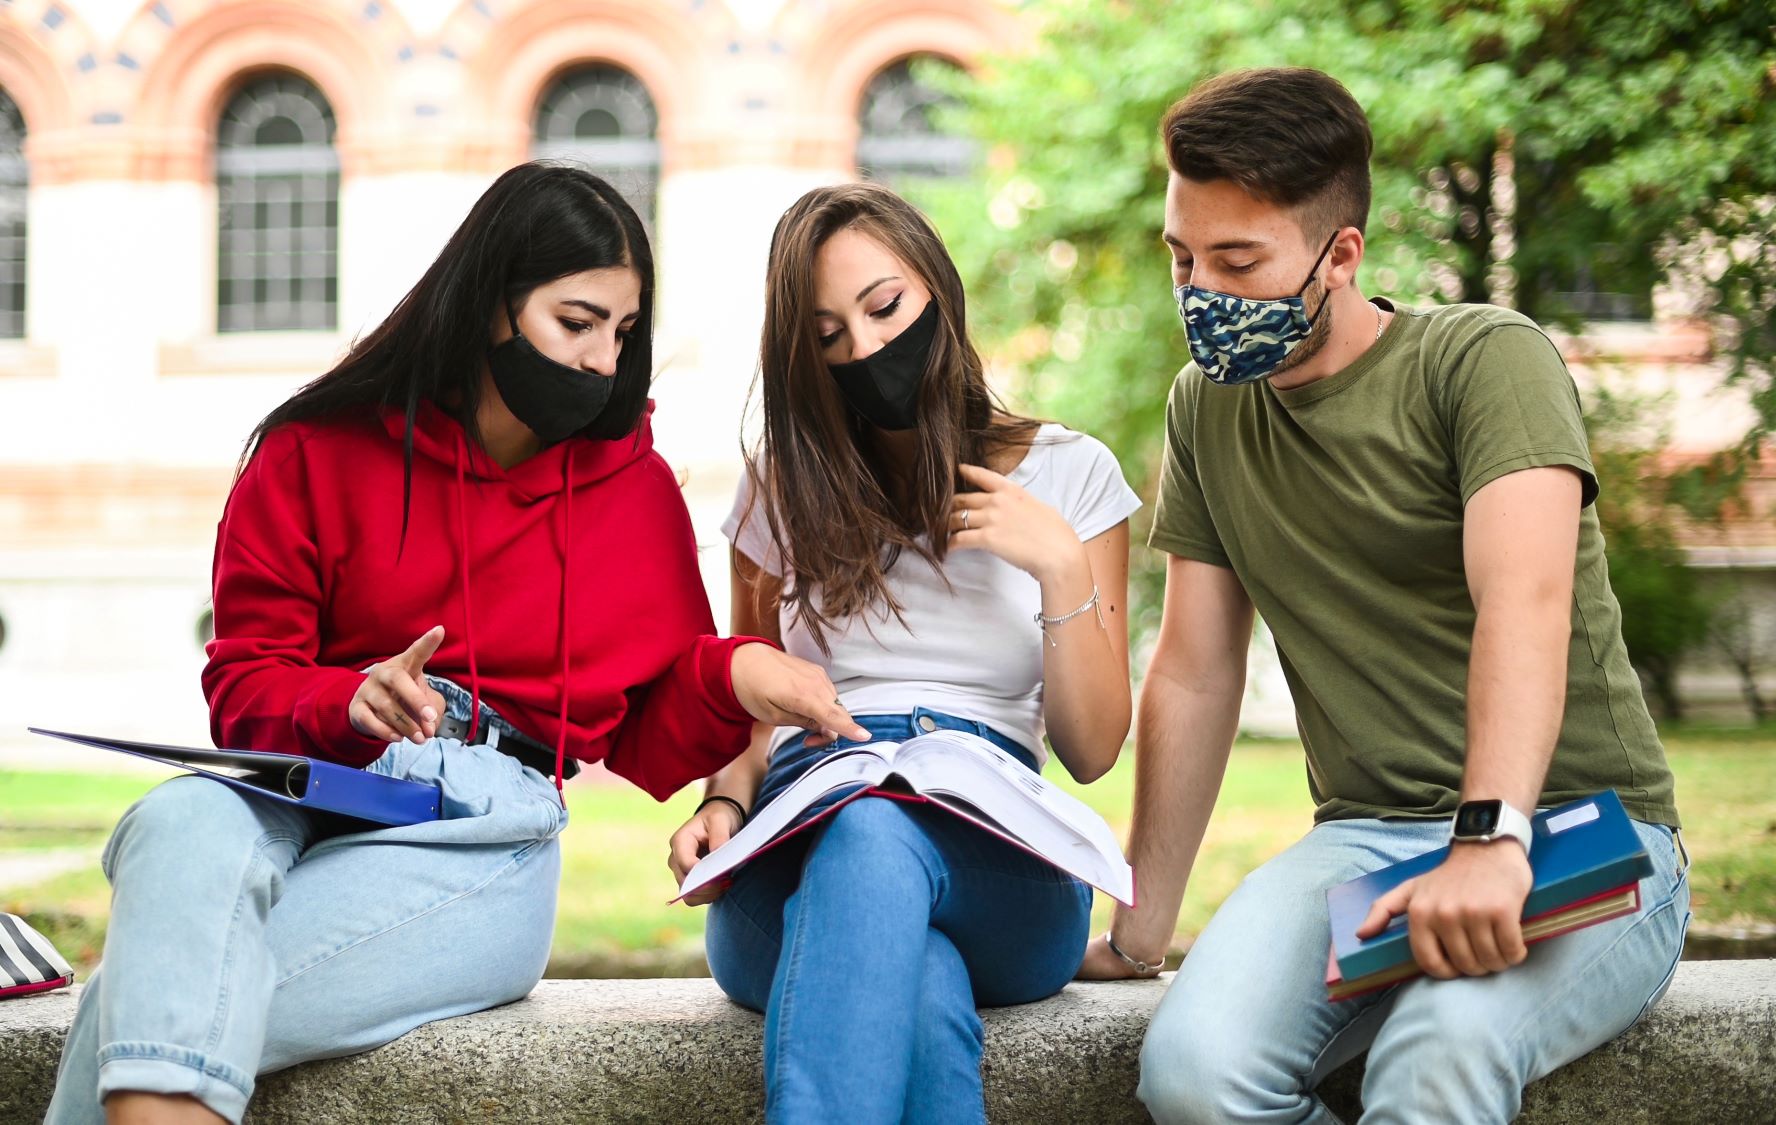 Three college students studying together and wearing masks